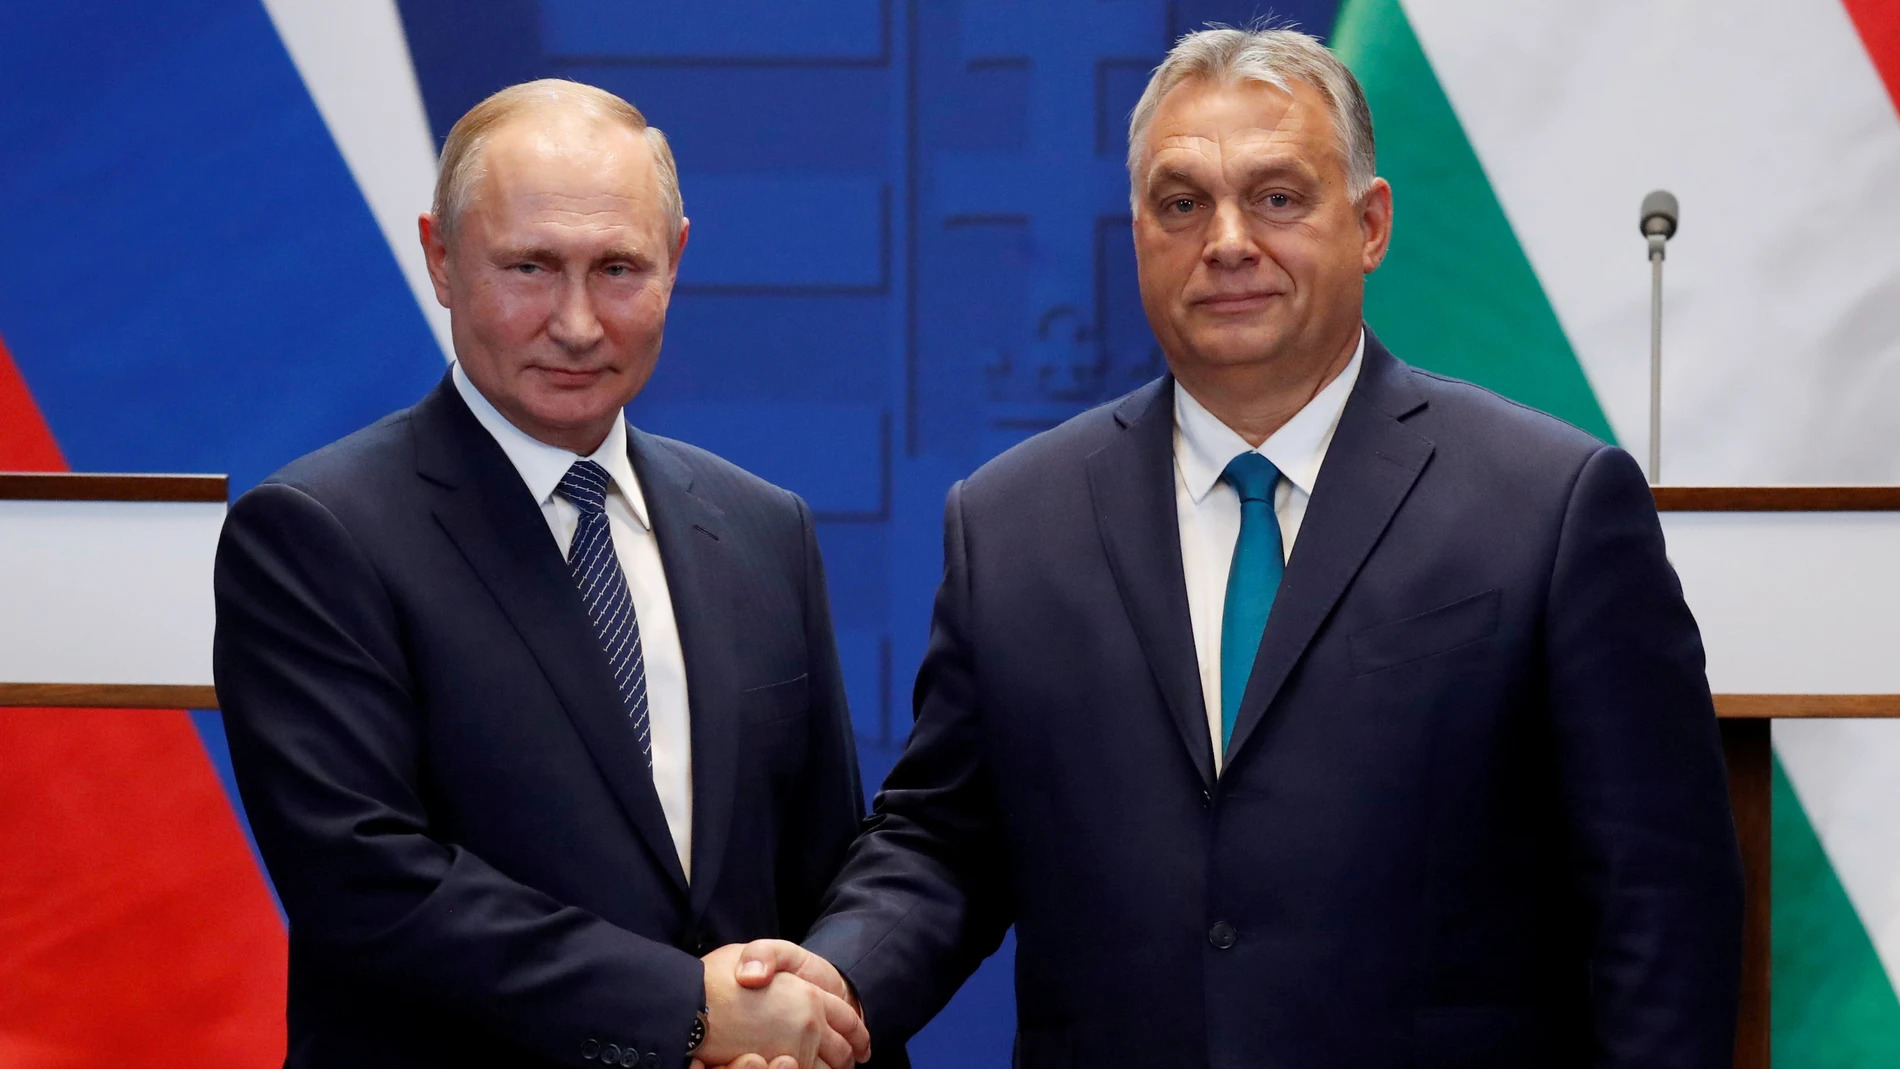 FILE PHOTO: Hungarian Prime Minister Viktor Orban and Russian President Vladimir Putin attend a news conference following their talks in Budapest